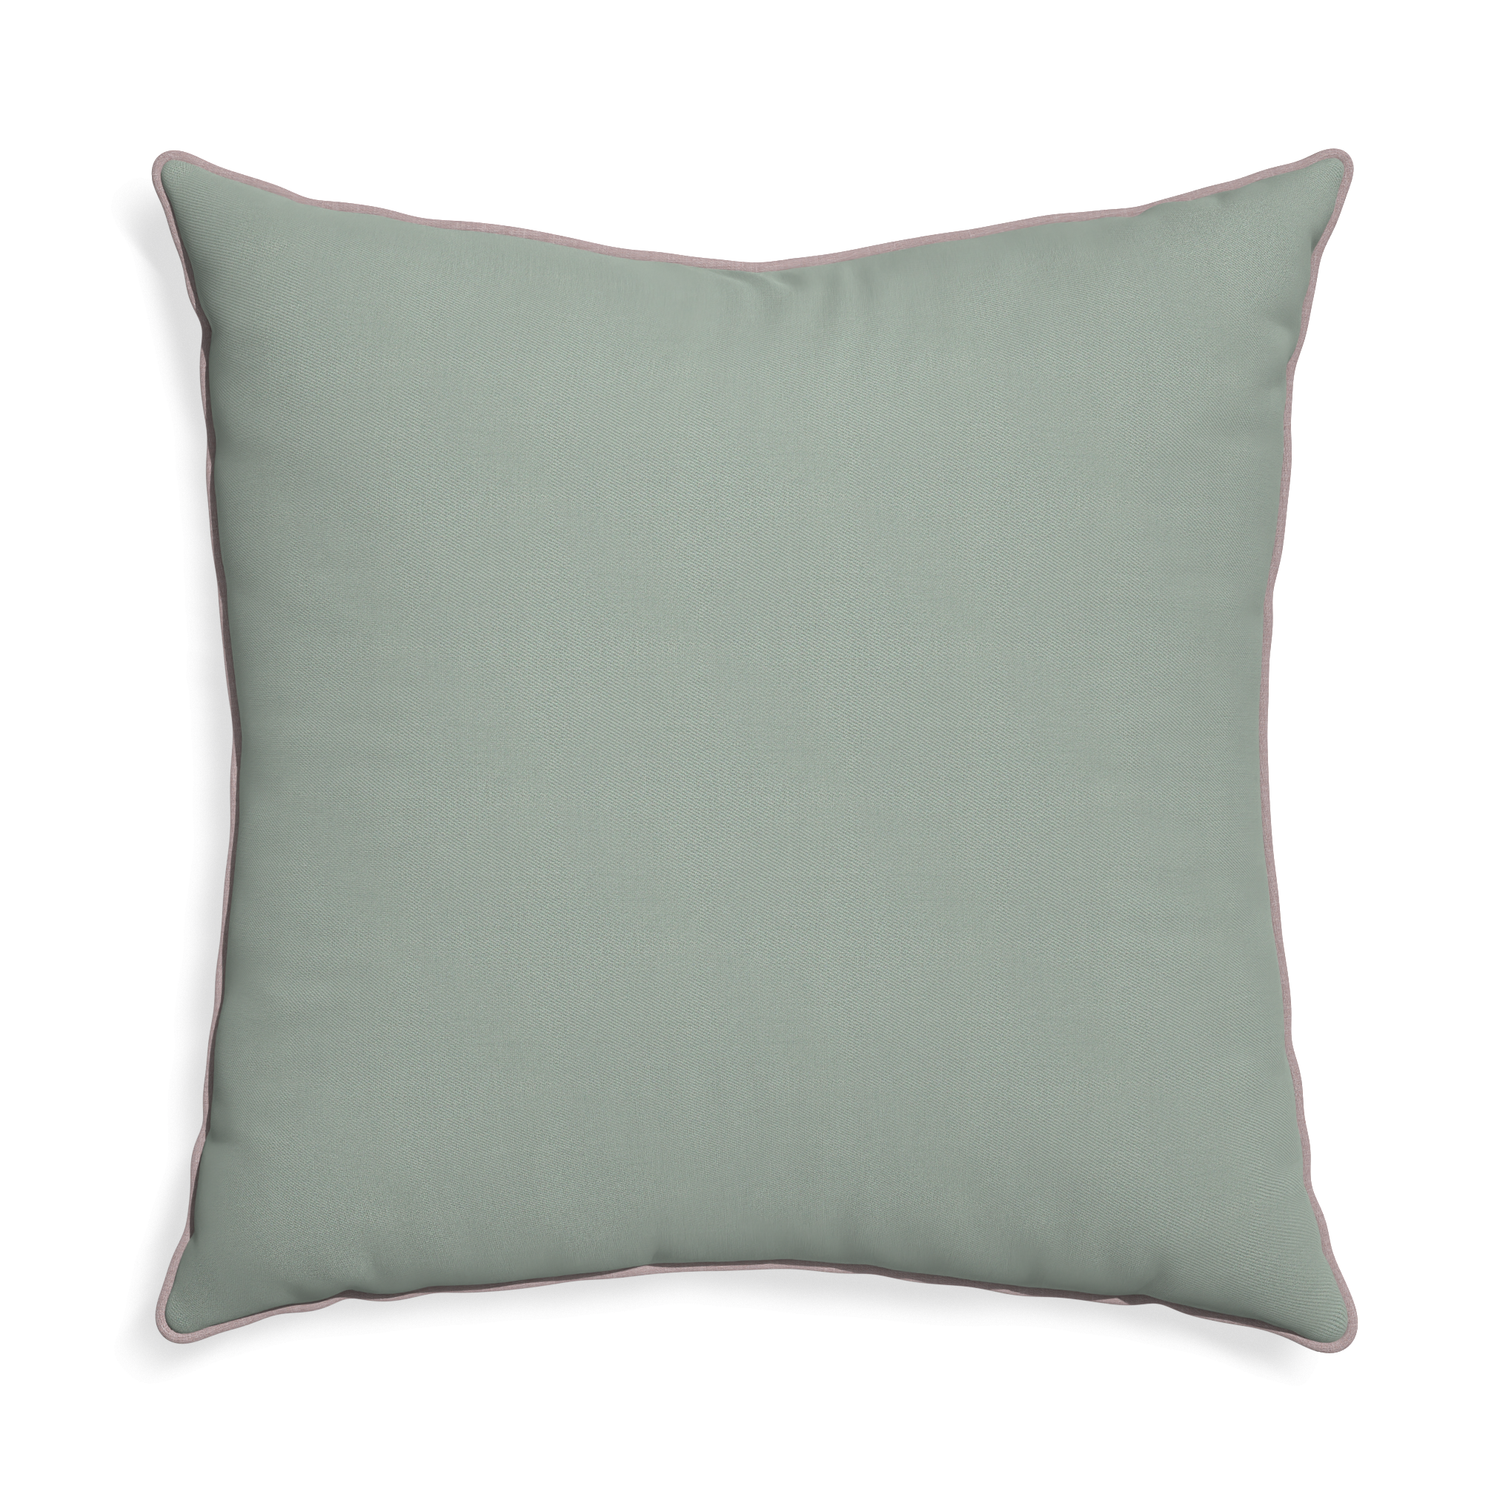 Euro-sham sage custom sage green cottonpillow with orchid piping on white background